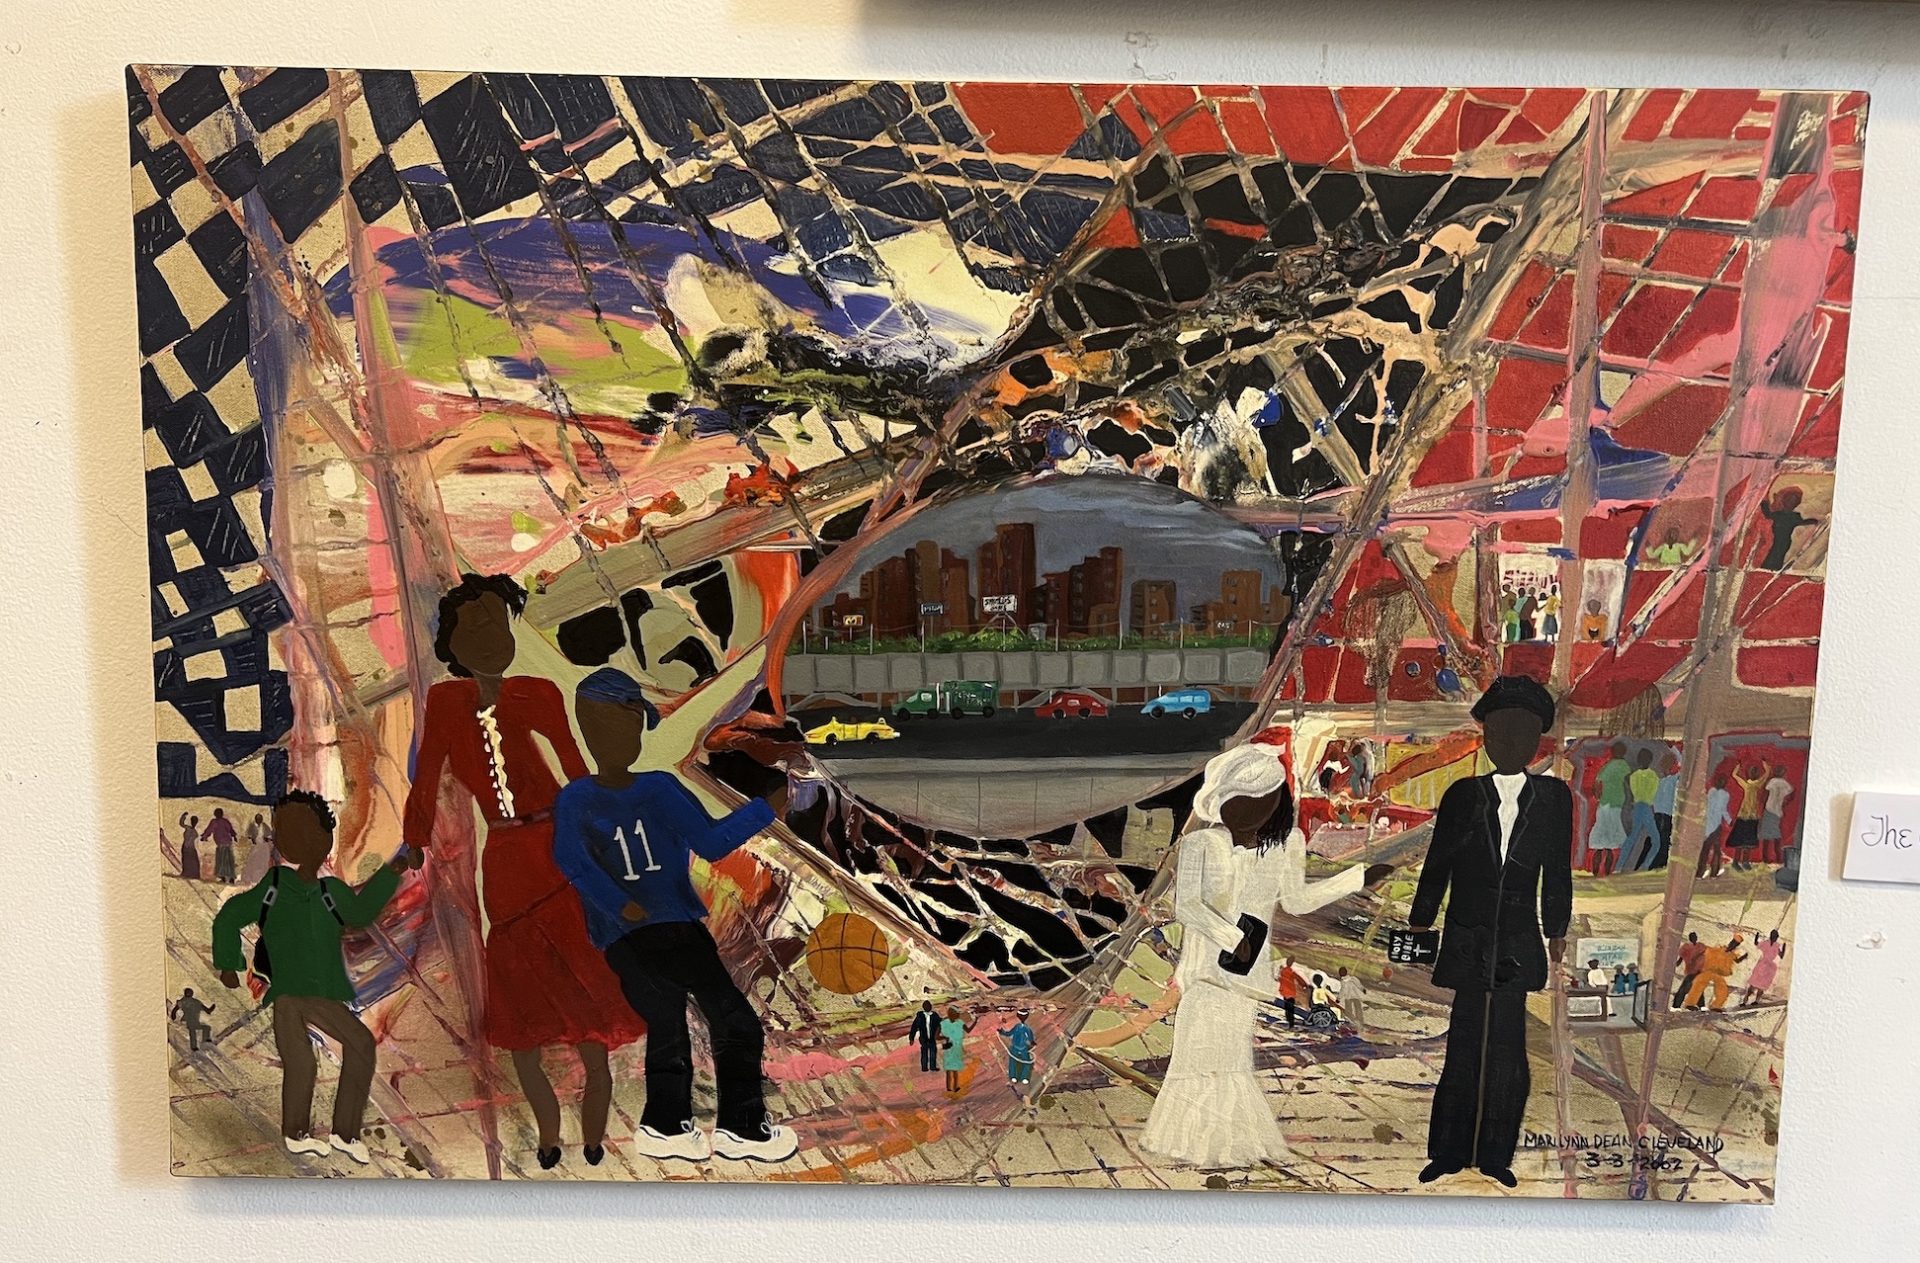 Painting: The City by Marilynn Dean Cleveland features a group of Black people in the foreground. Abstract shapes are behind them, including something that resembles the Bean sculpture in Chicago. The city is reflected in the central Bean shape. The background is made up of abstract paint strokes. The painting is primarily dark: reds, blues, greys.